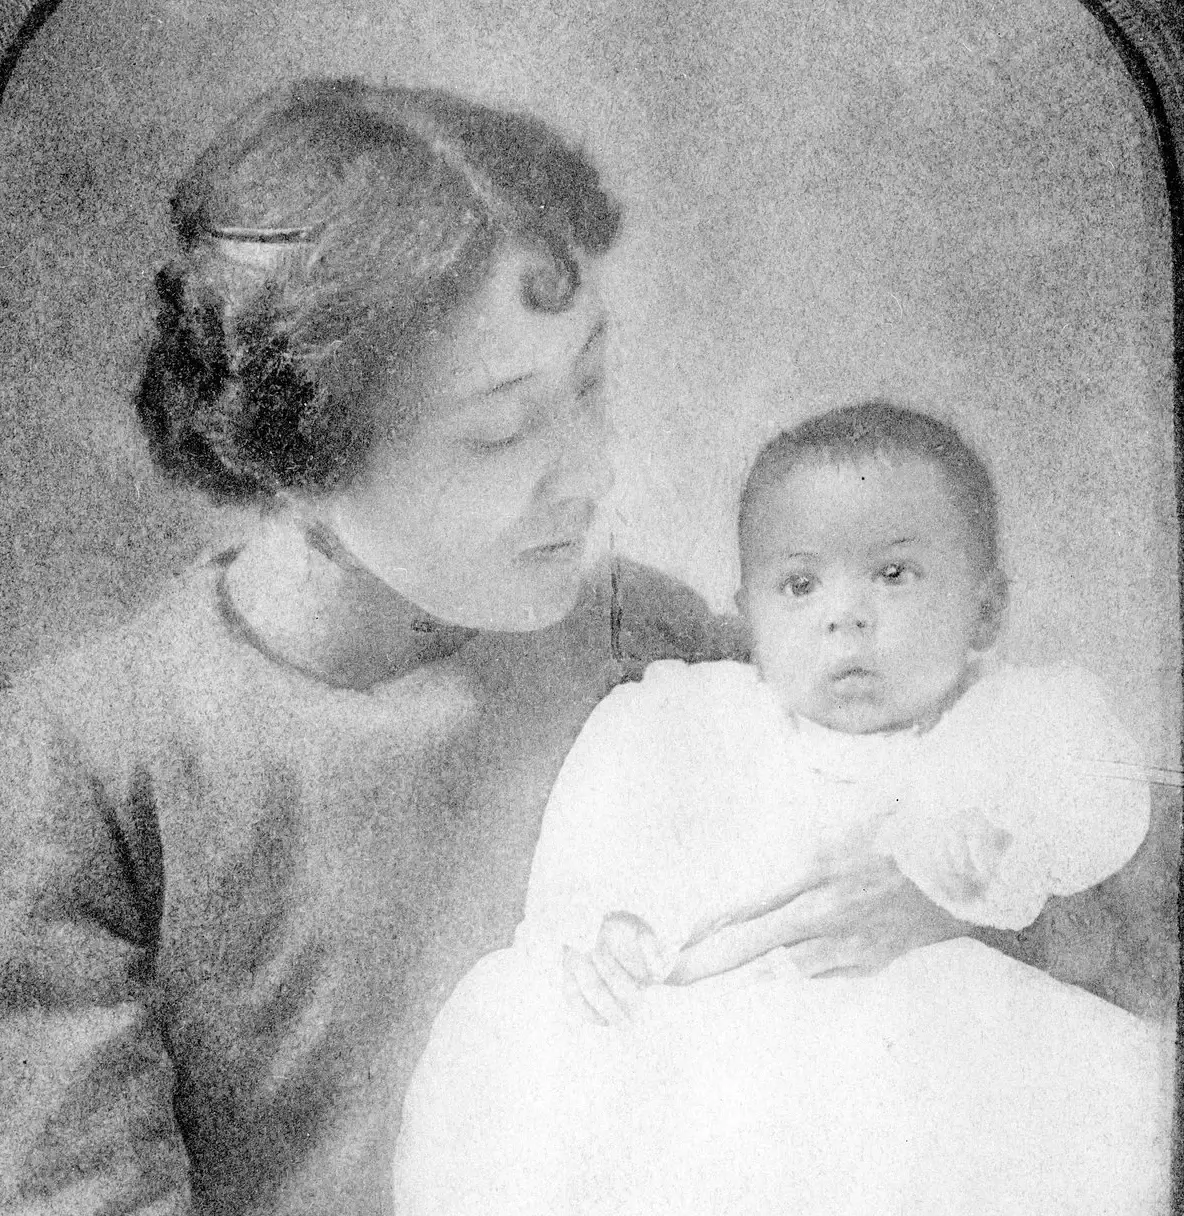 Langston Hughes and his mother, 1901